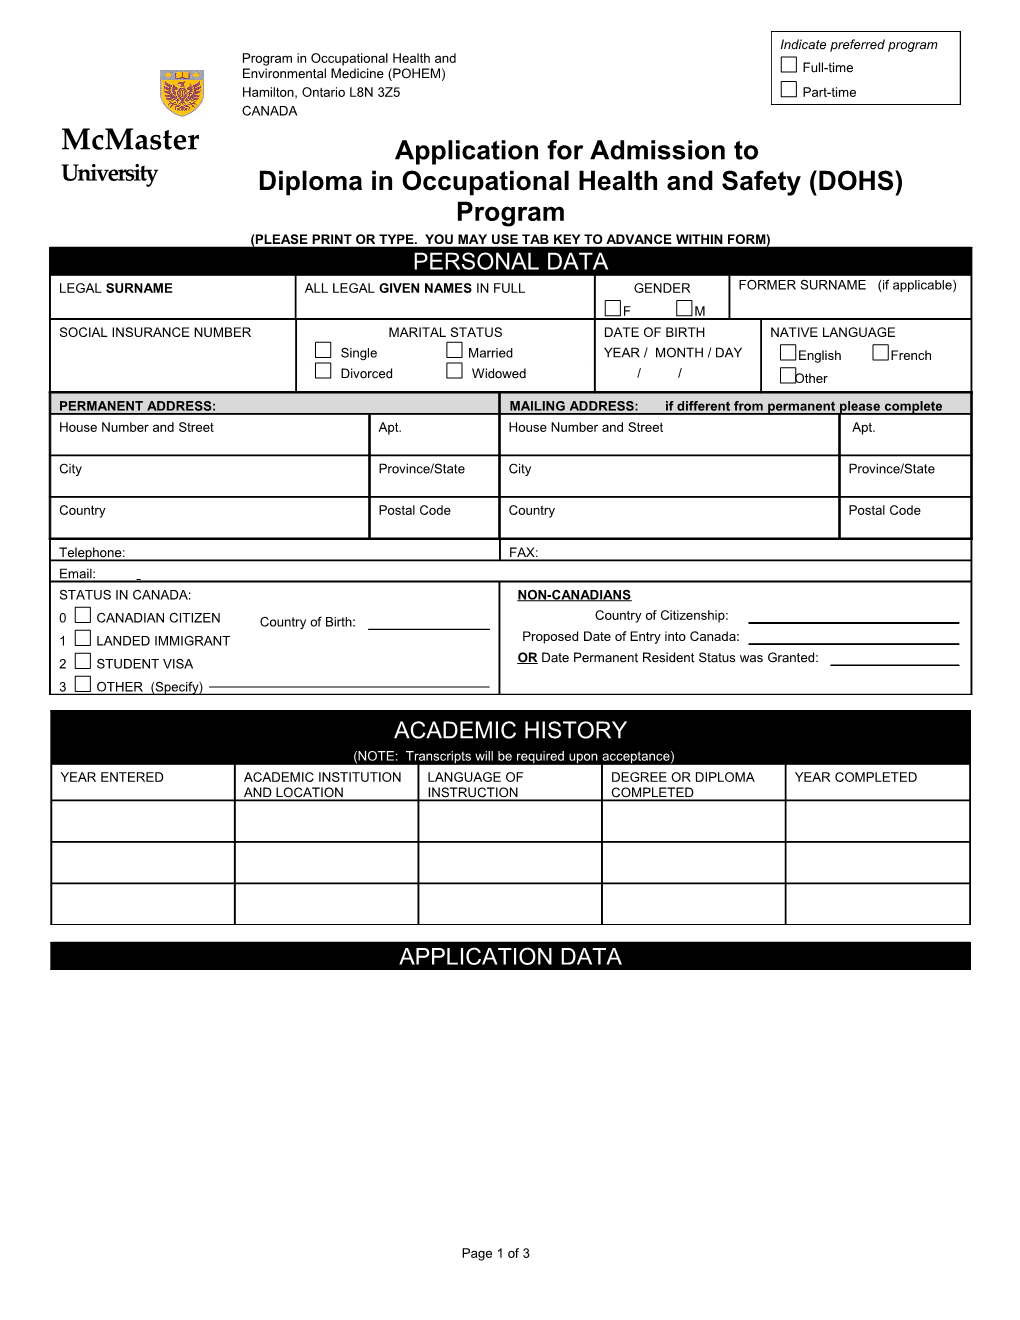 Diploma in Occupational Health and Safety (DOHS)Program